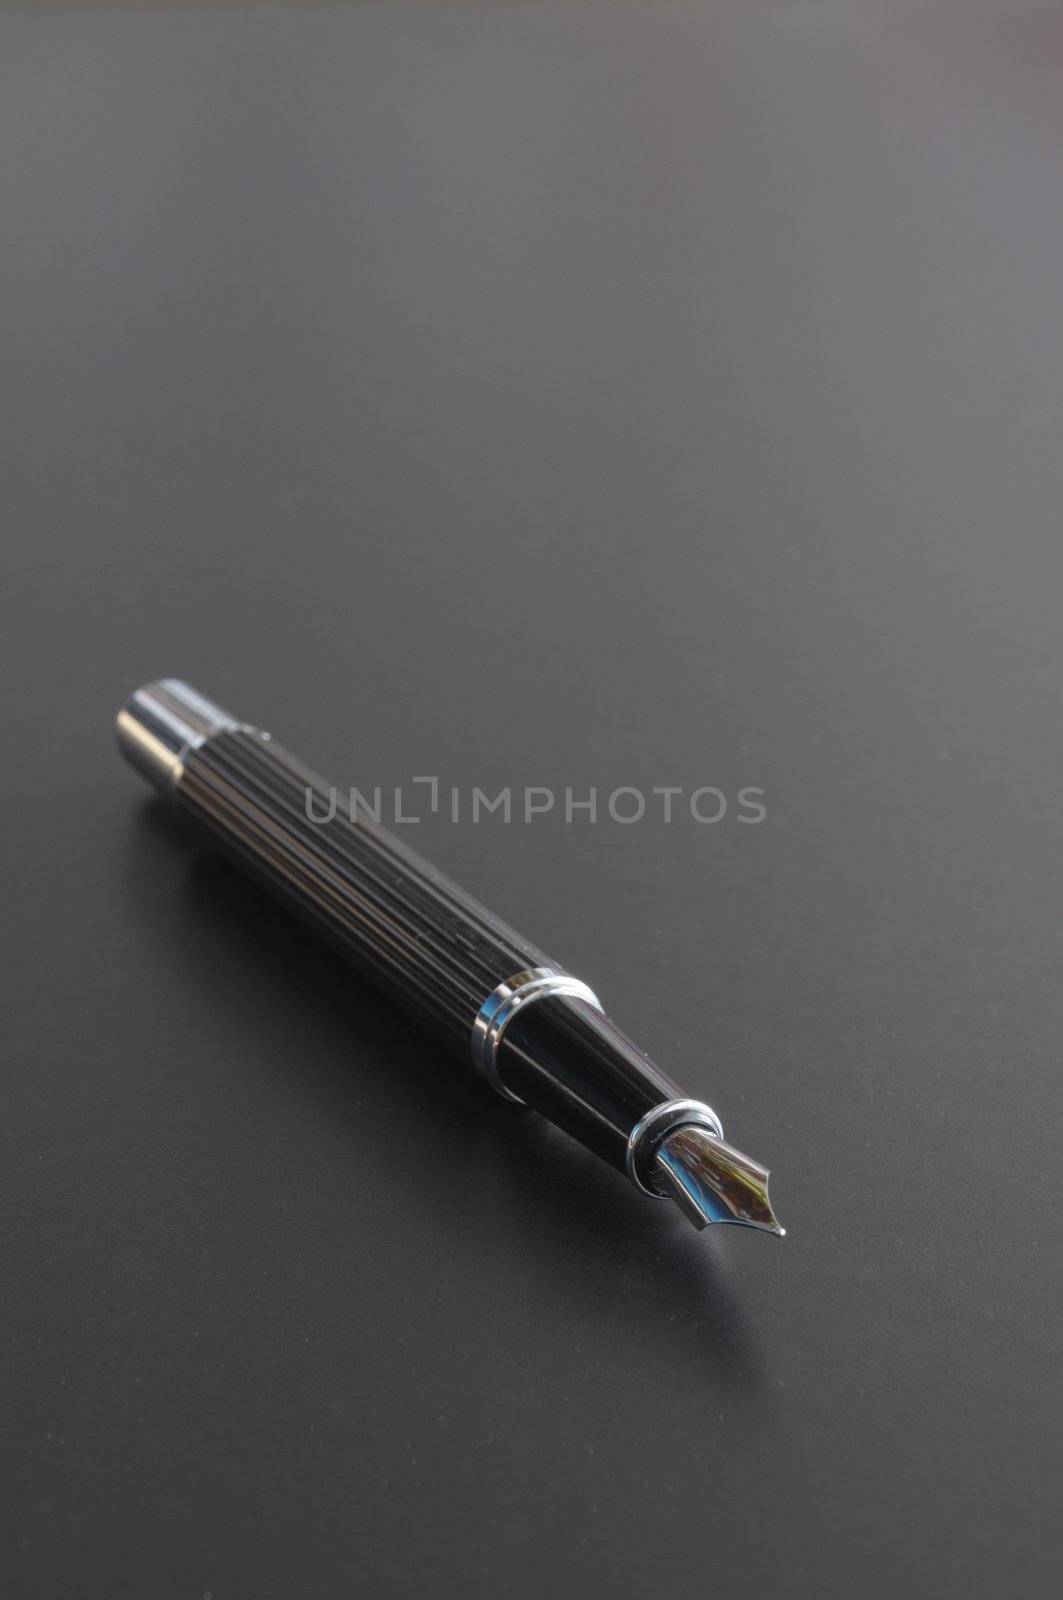 pen showing communication contact us or mail concept on black background